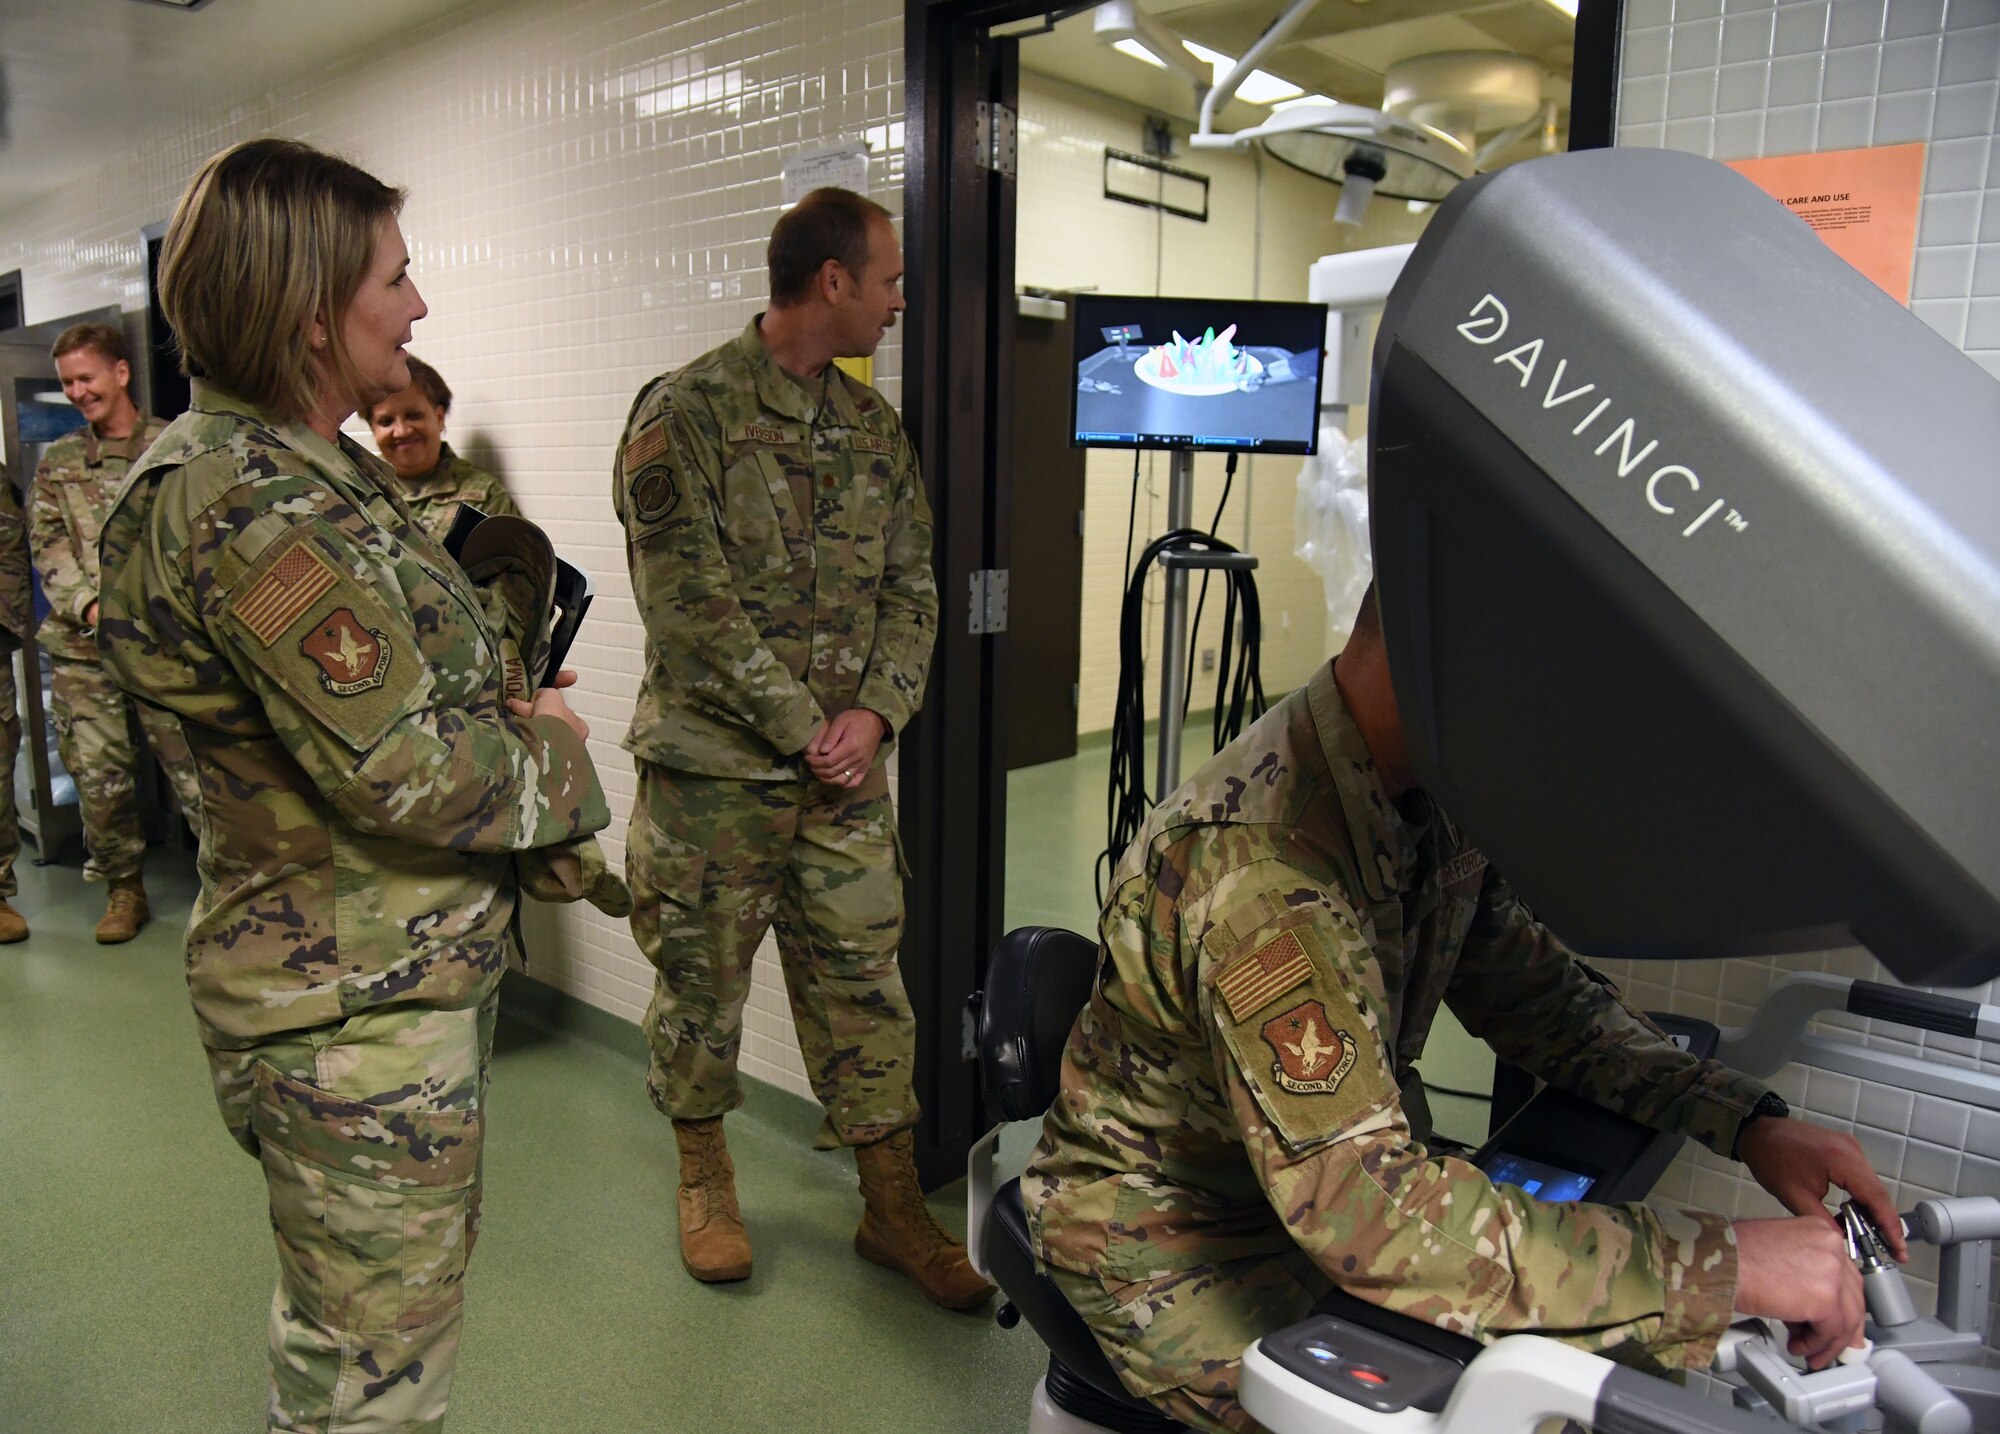 U.S. Air Force Col. Nicholas Dipoma, Second Air Force vice commander, operates a Da Vinci Robot trainer while Chief Master Sgt. Kathleen McCool, Second Air Force command chief, stands by during an immersion tour inside the 81st Medical Group clinical research lab at Keesler Air Force Base, Mississippi, July 29, 2022. The tour also included the 334th Training Squadron air traffic control simulator and the Levitow Training Support Facility. (U.S. Air Force photo by Kemberly Groue)